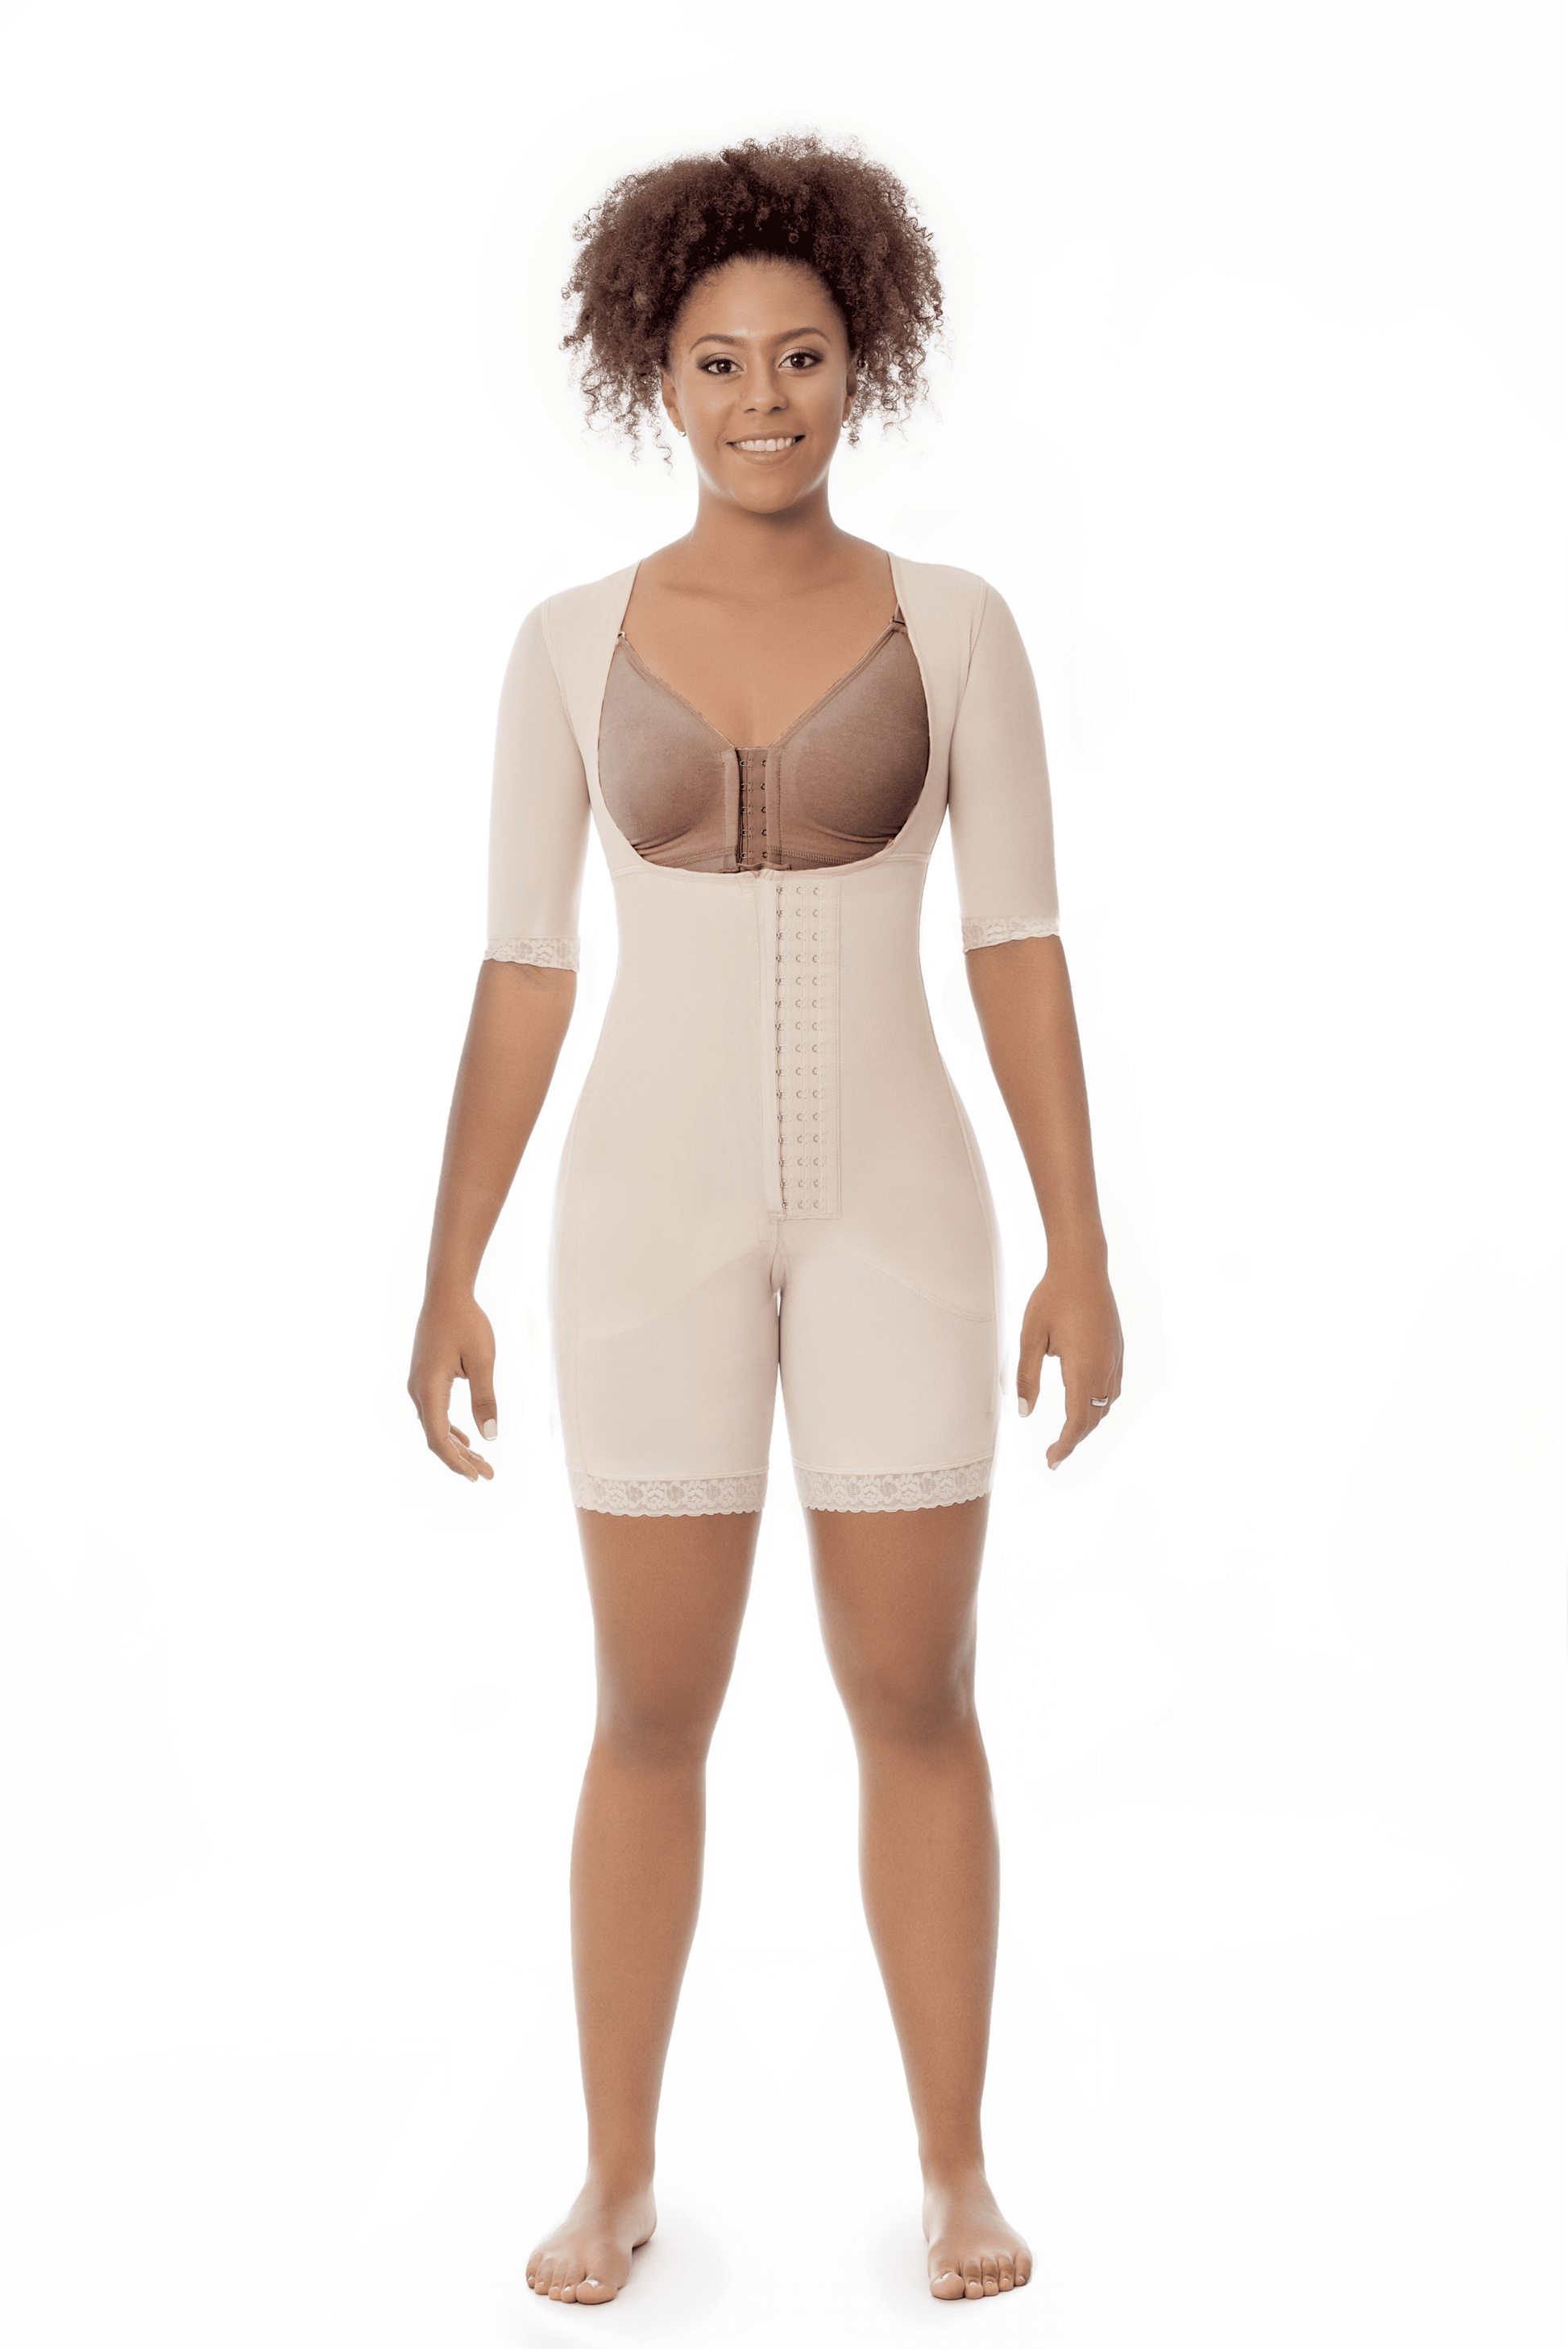 Stage 2 Compression Bundle: Option 6 (Braless full body above the